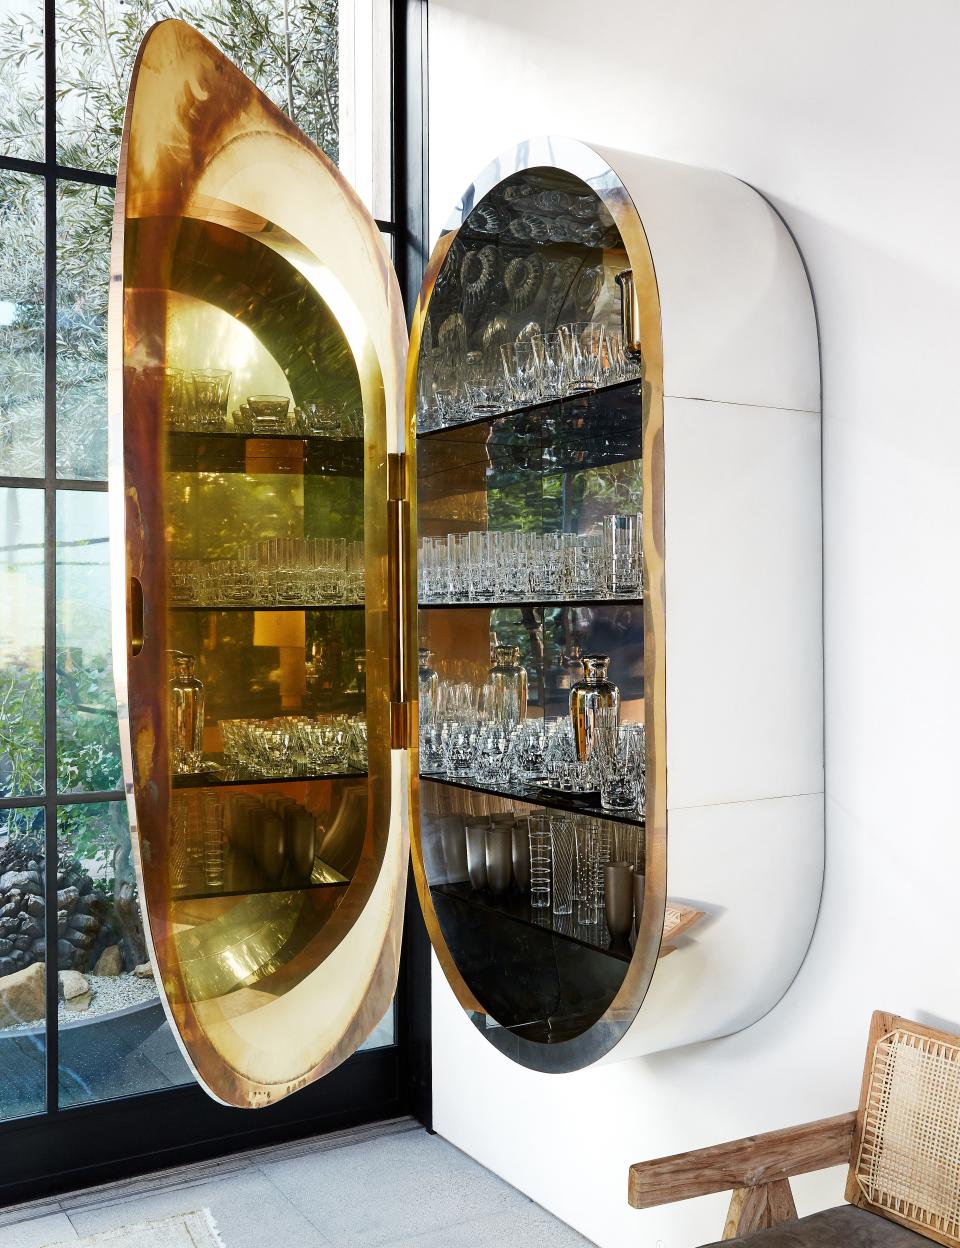 A wall cabinet by Vincenzo de Cotiis stores glassware.